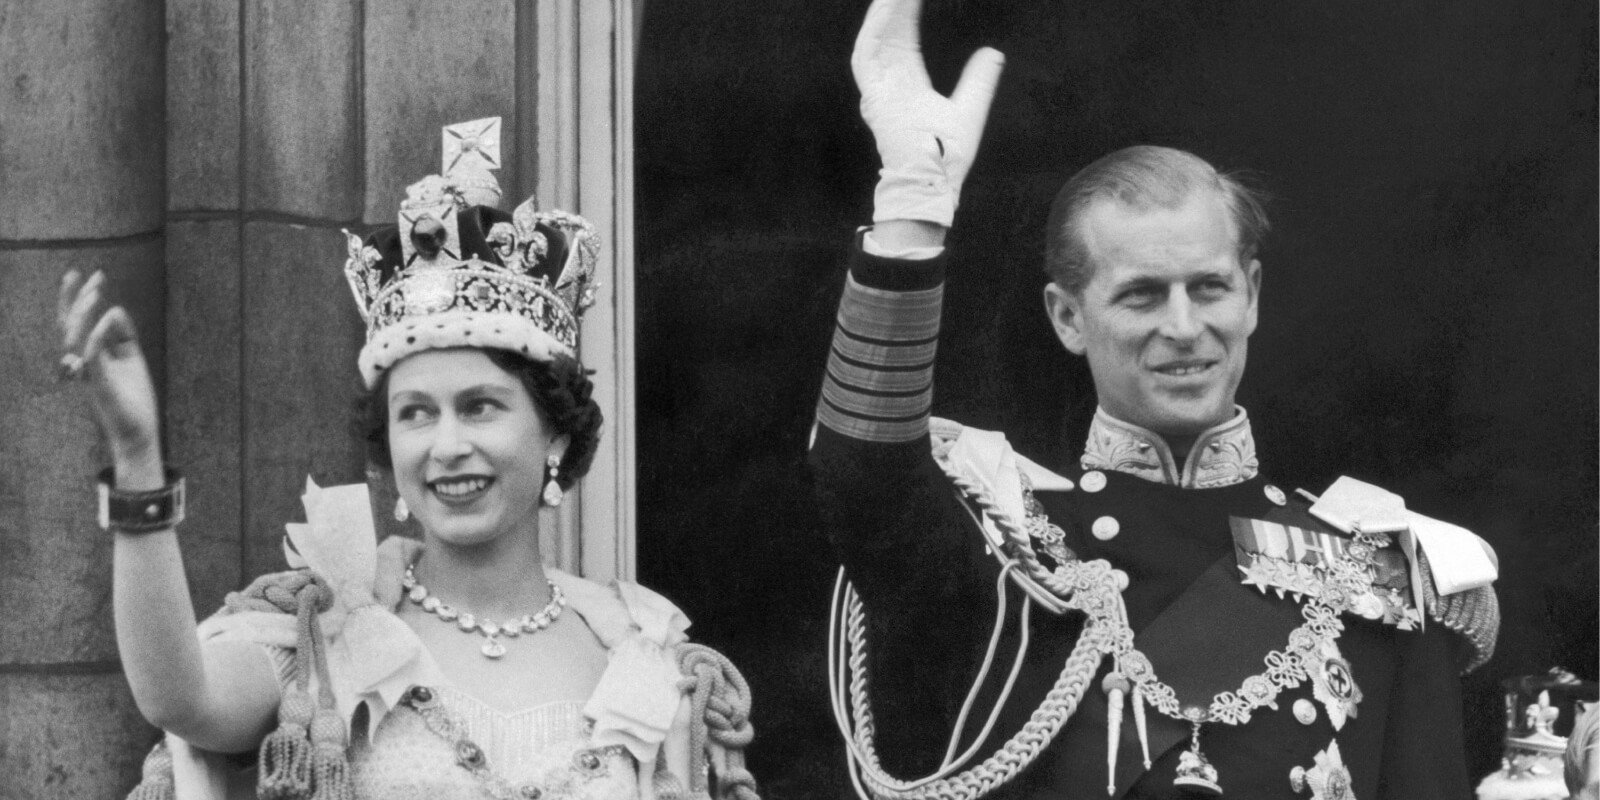 The coronation ring can be seen on Queen Elizabeth's right hand as she and Prince Philip wave to crowds from the Buckingham Palace balcony in 1953.